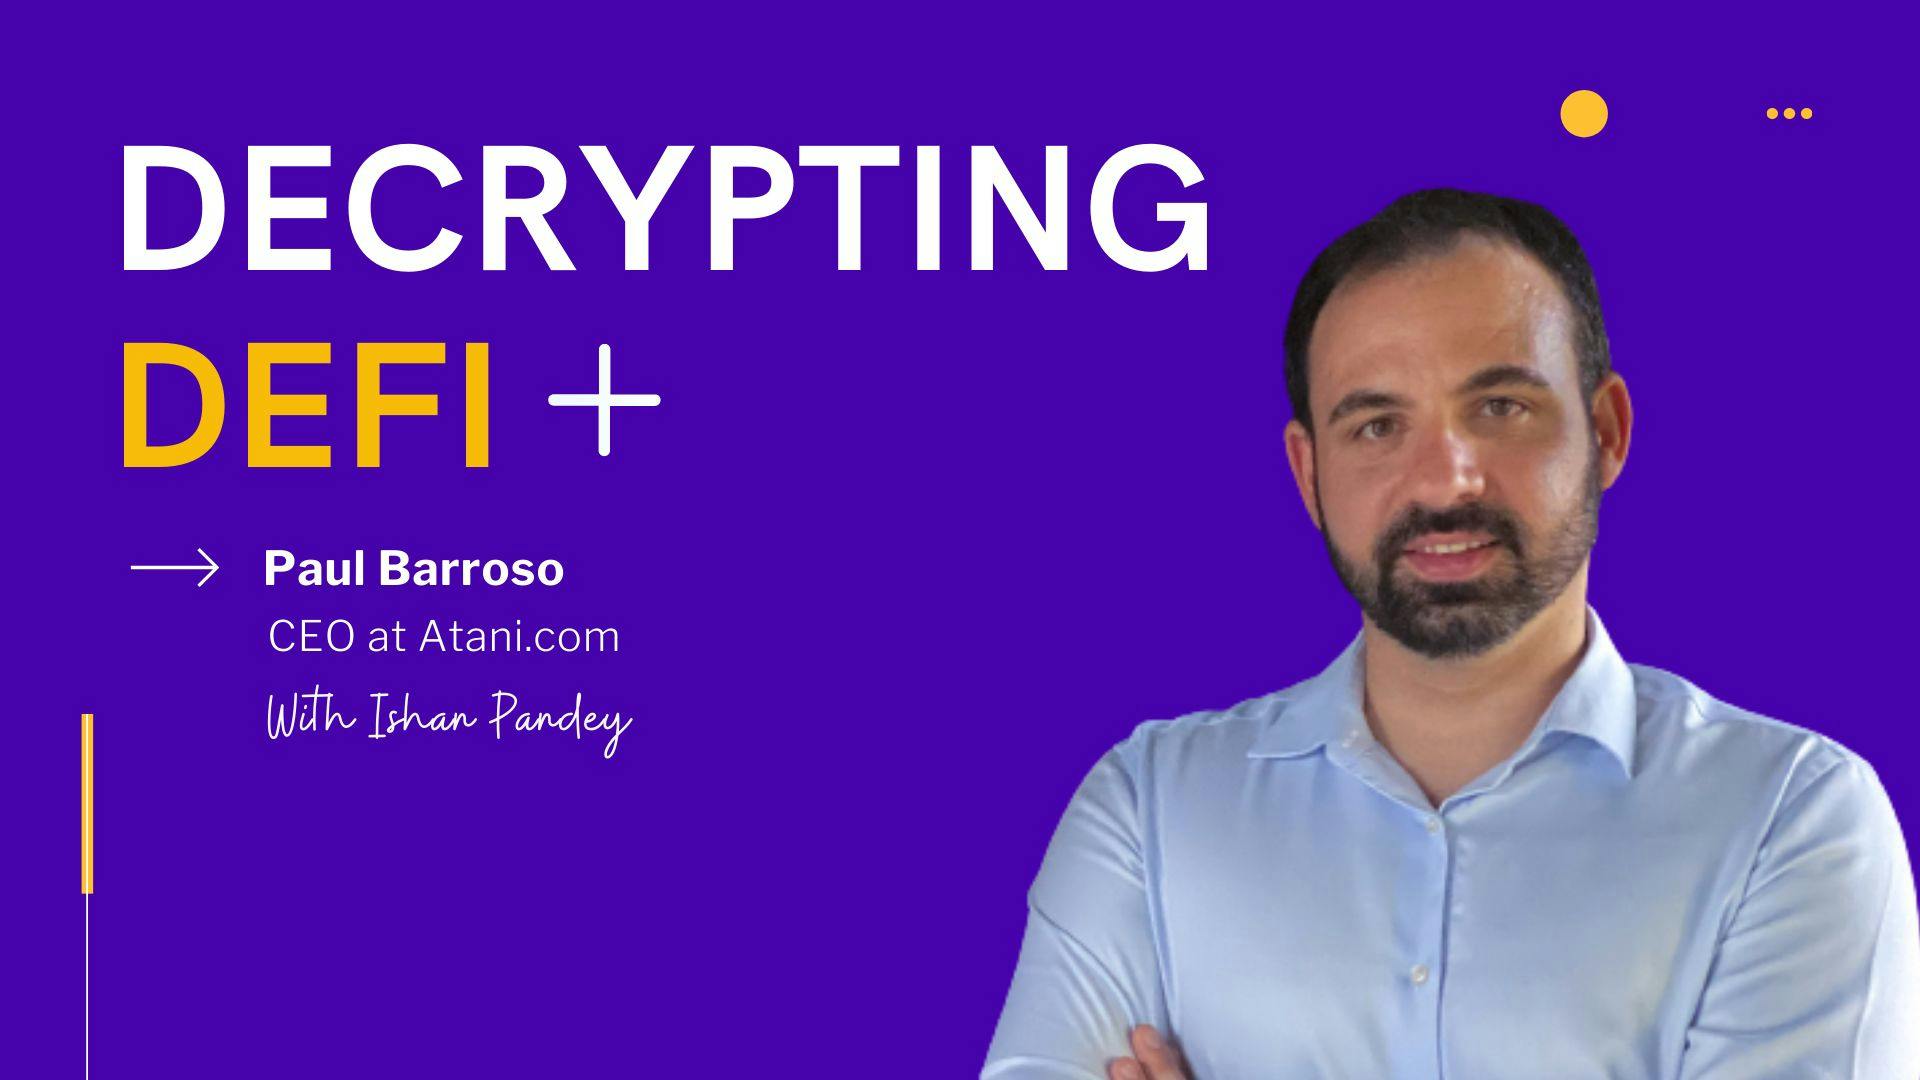 /decrypting-defi-and-cryptocurrency-markets-with-paul-barroso-ceo-at-atanicom-ny1a354e feature image